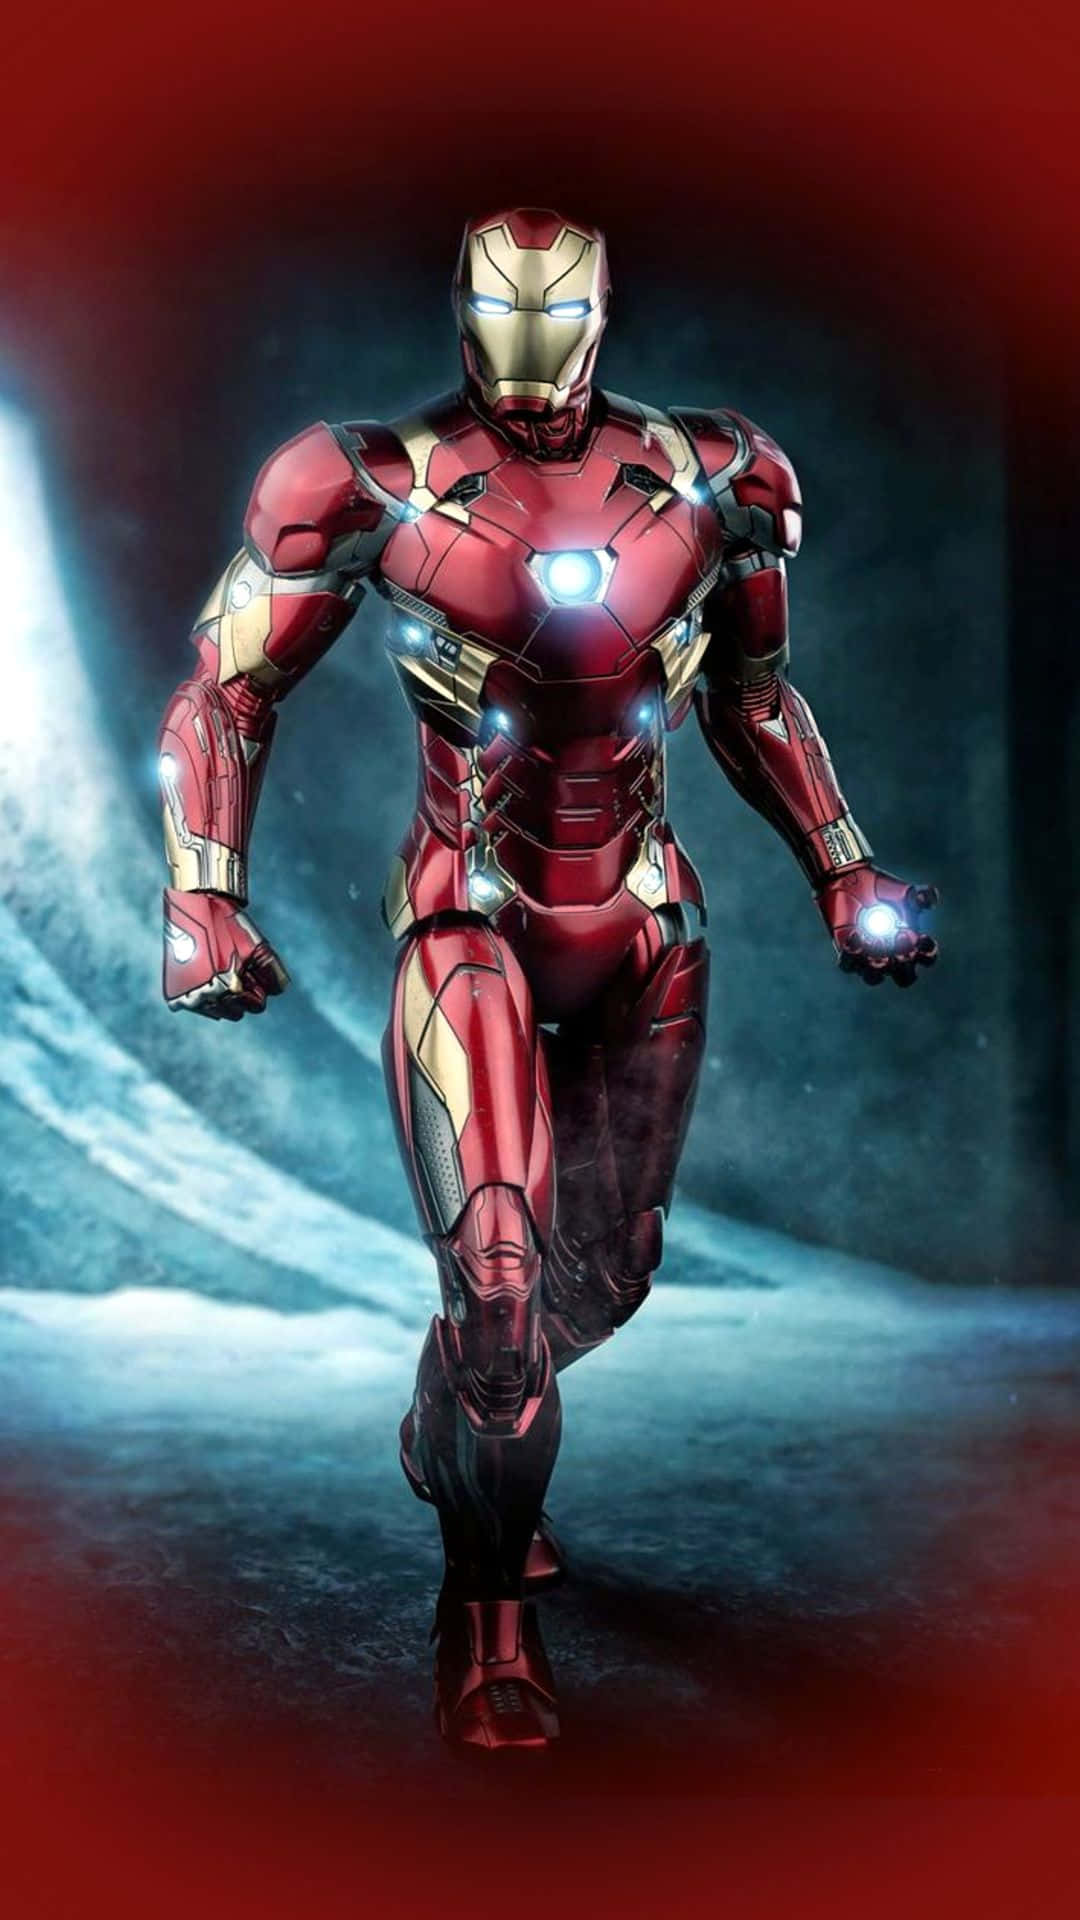 An Android version of Iron Man